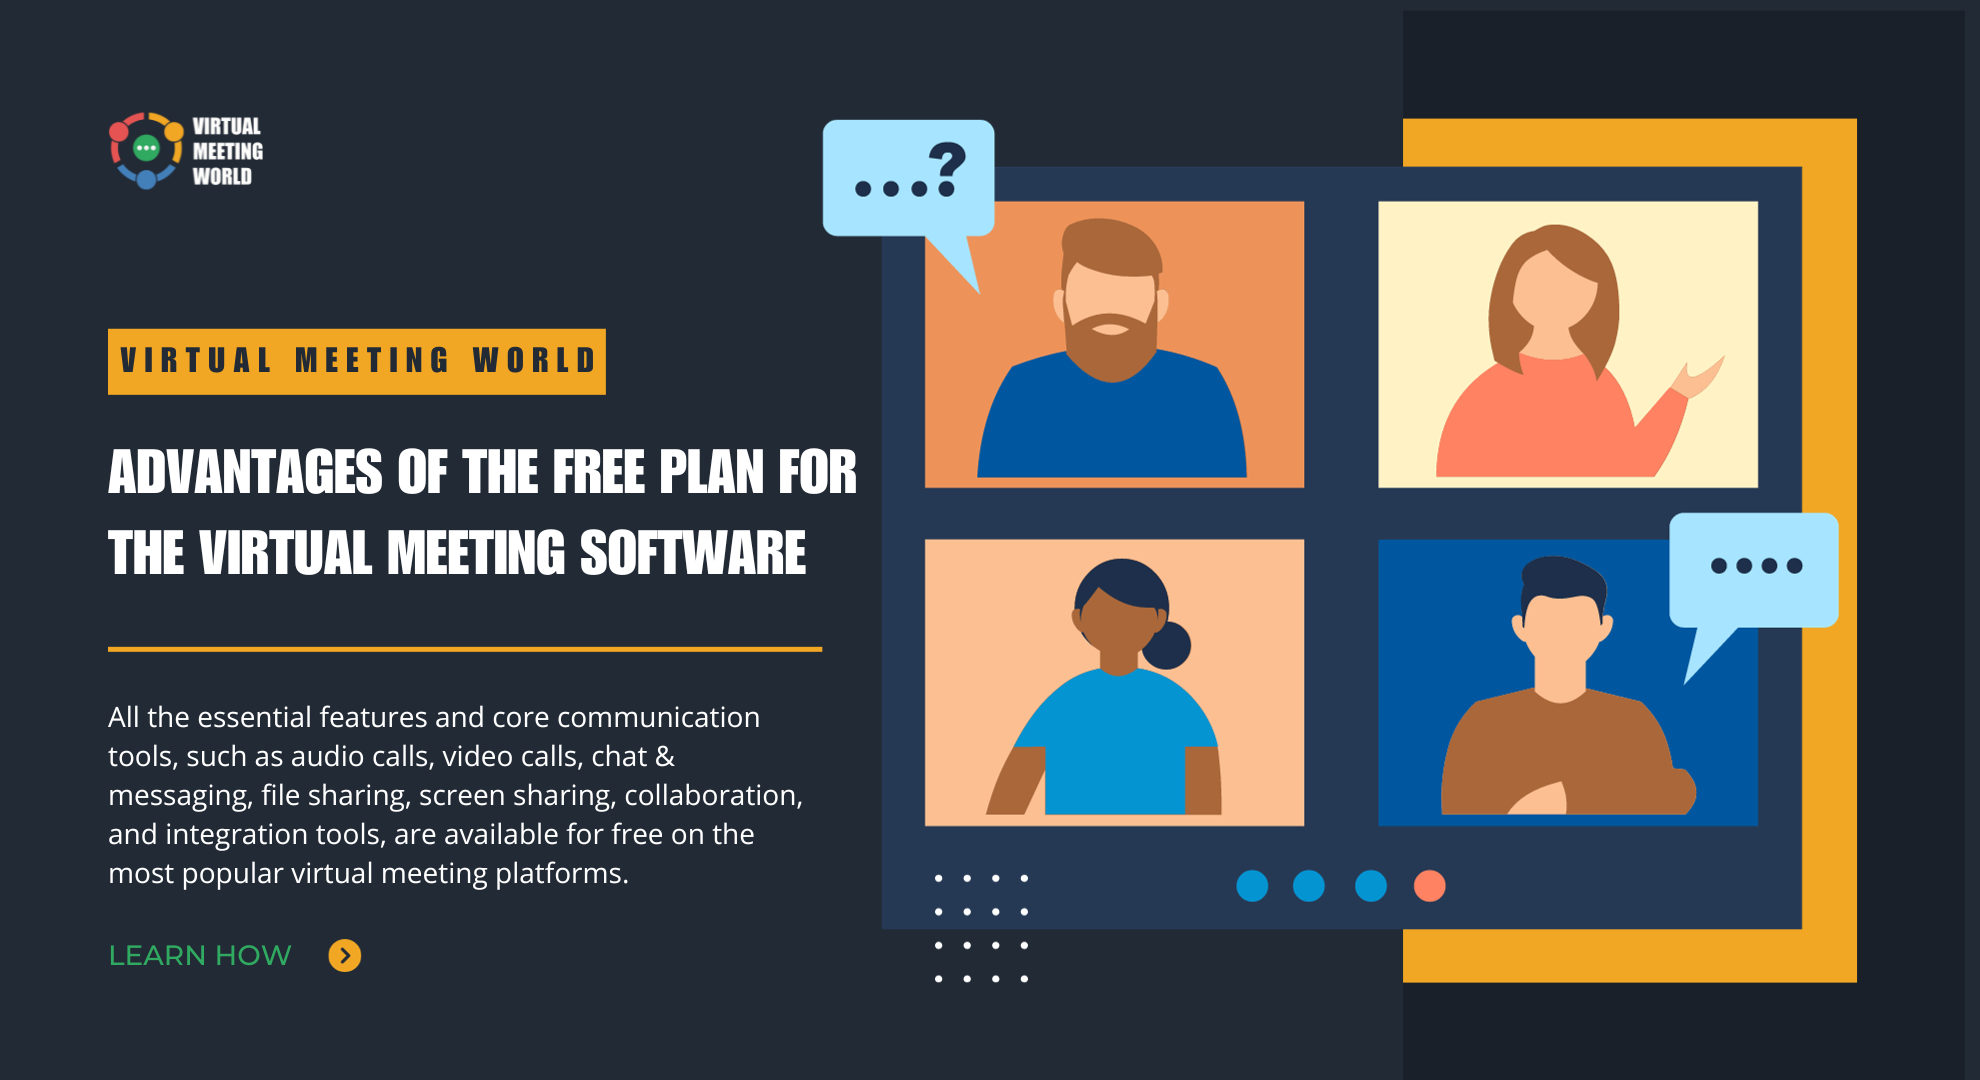 Advantages of the Free Plan for the Virtual Meeting Software Infographic design